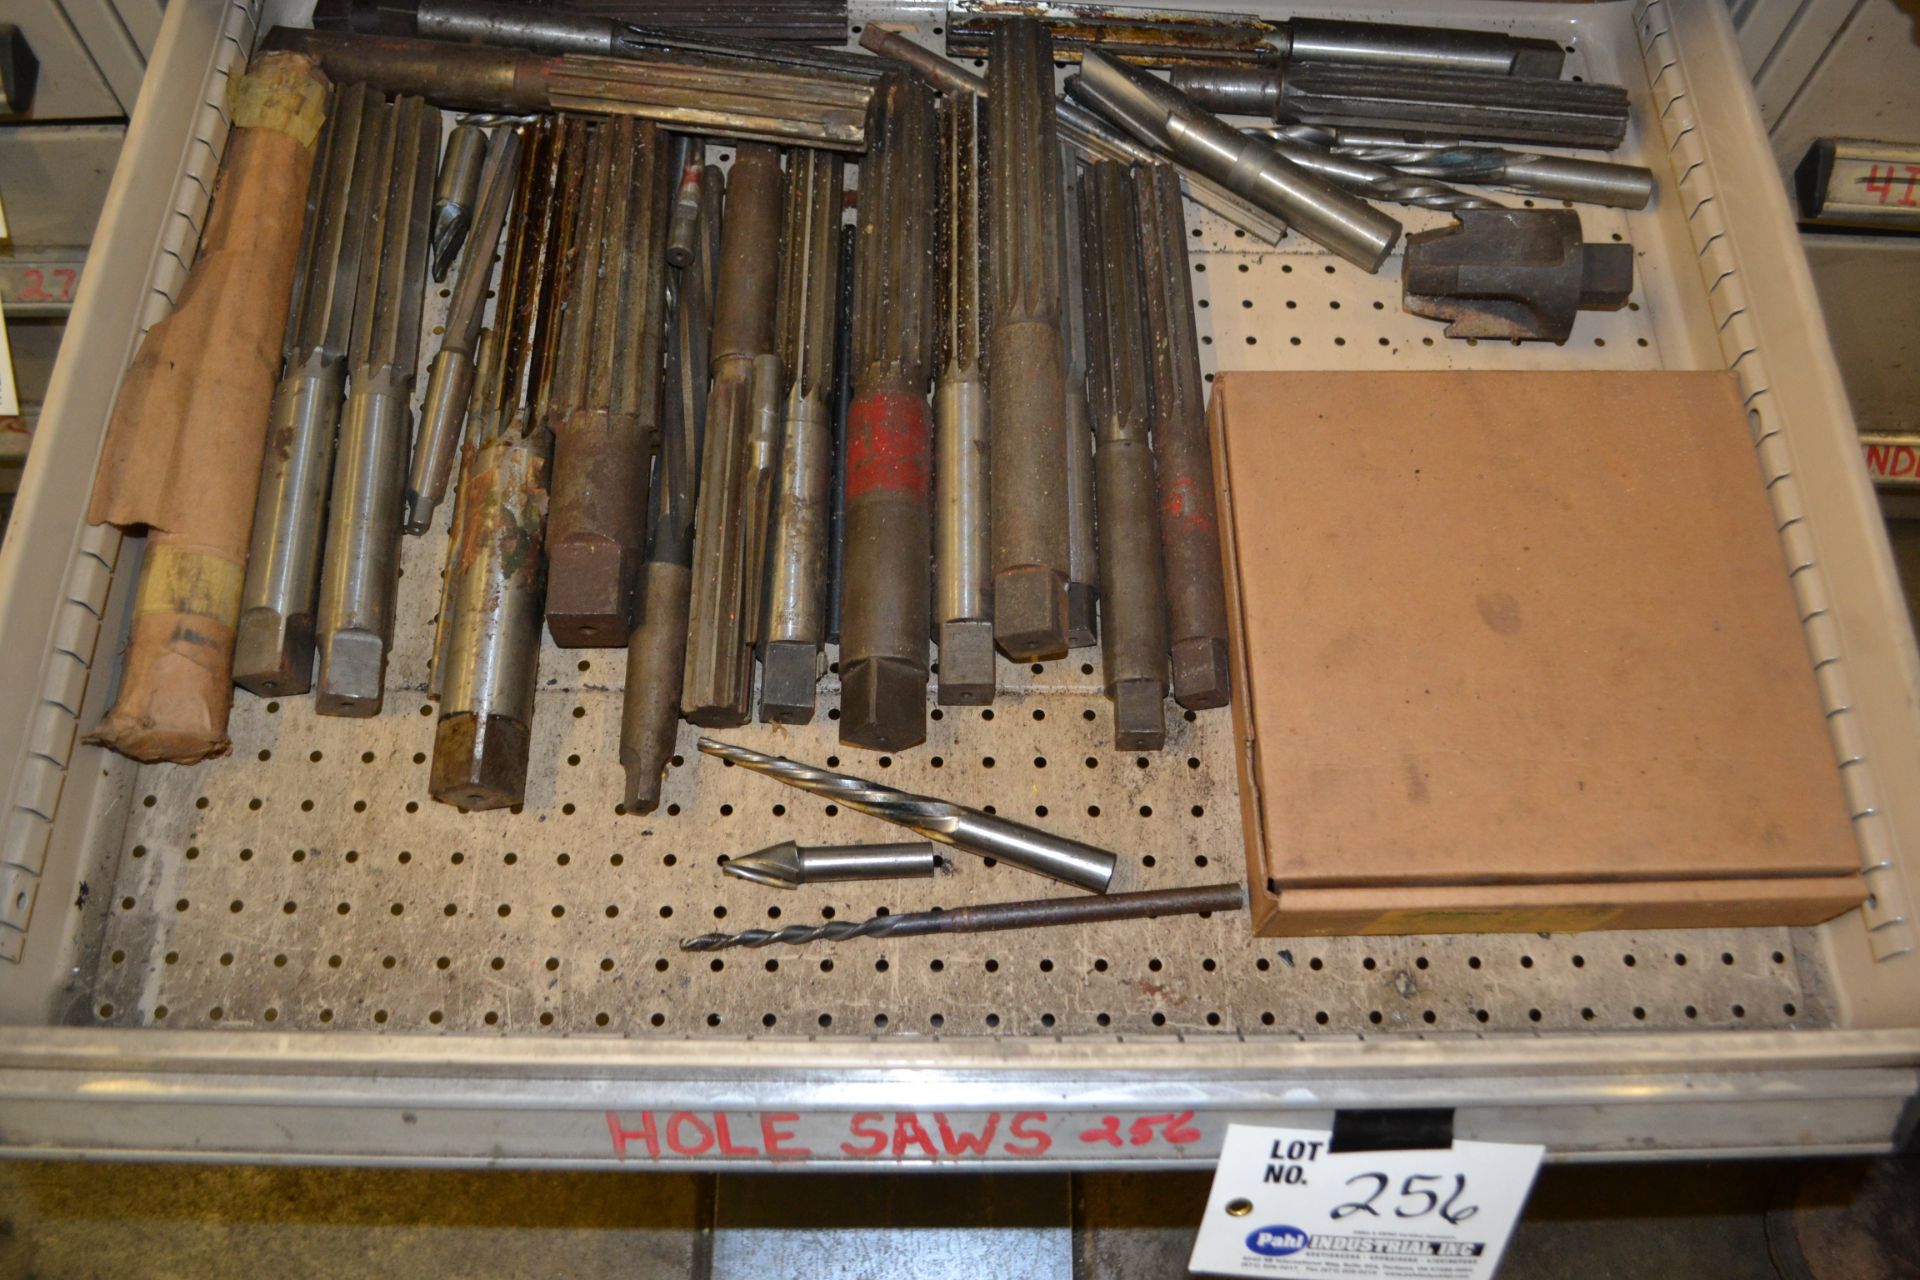 contents of drawer (hole saws)